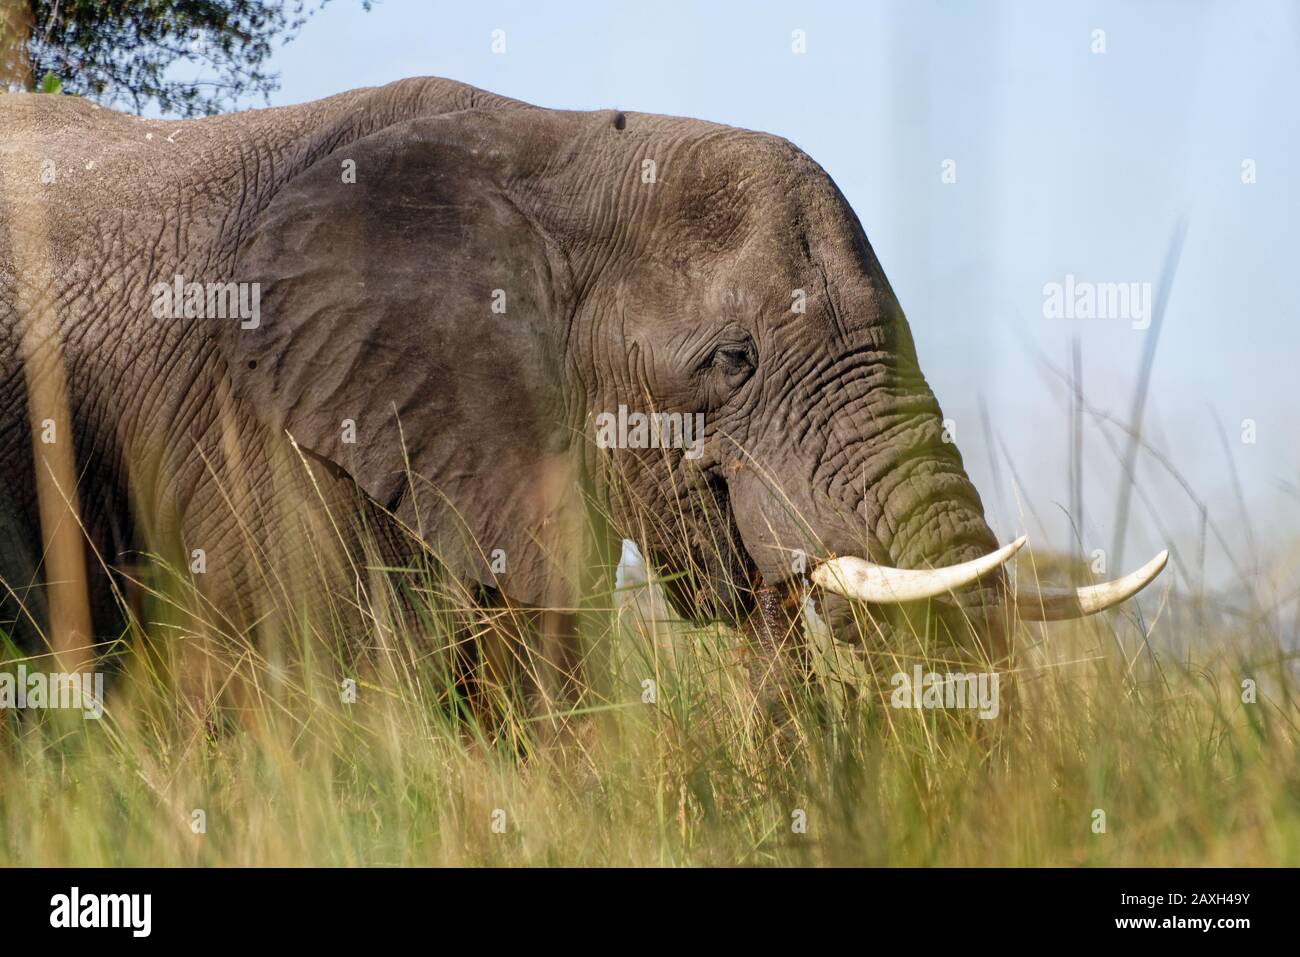 A bull elephant in the Okavango Delta, viewed from a mokoro on the water Stock Photo